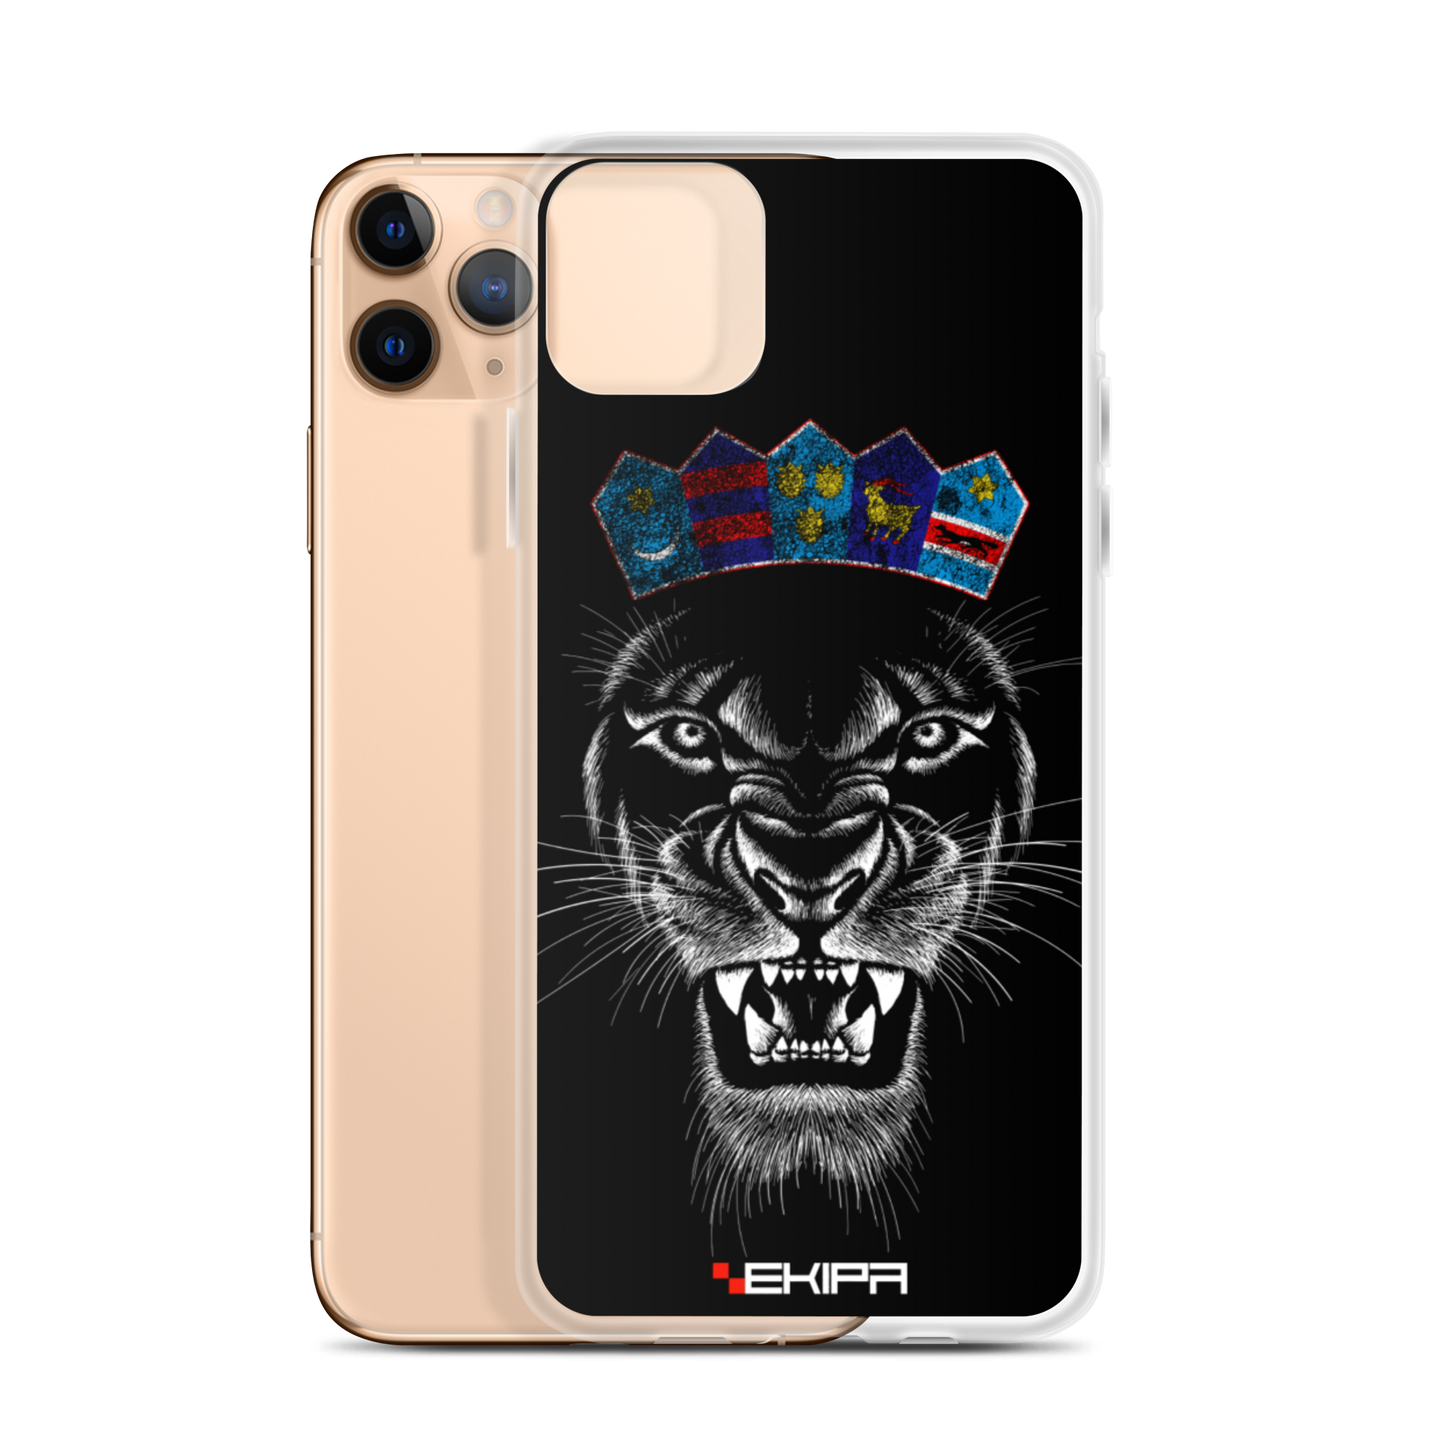 "Lion King" - iPhone case